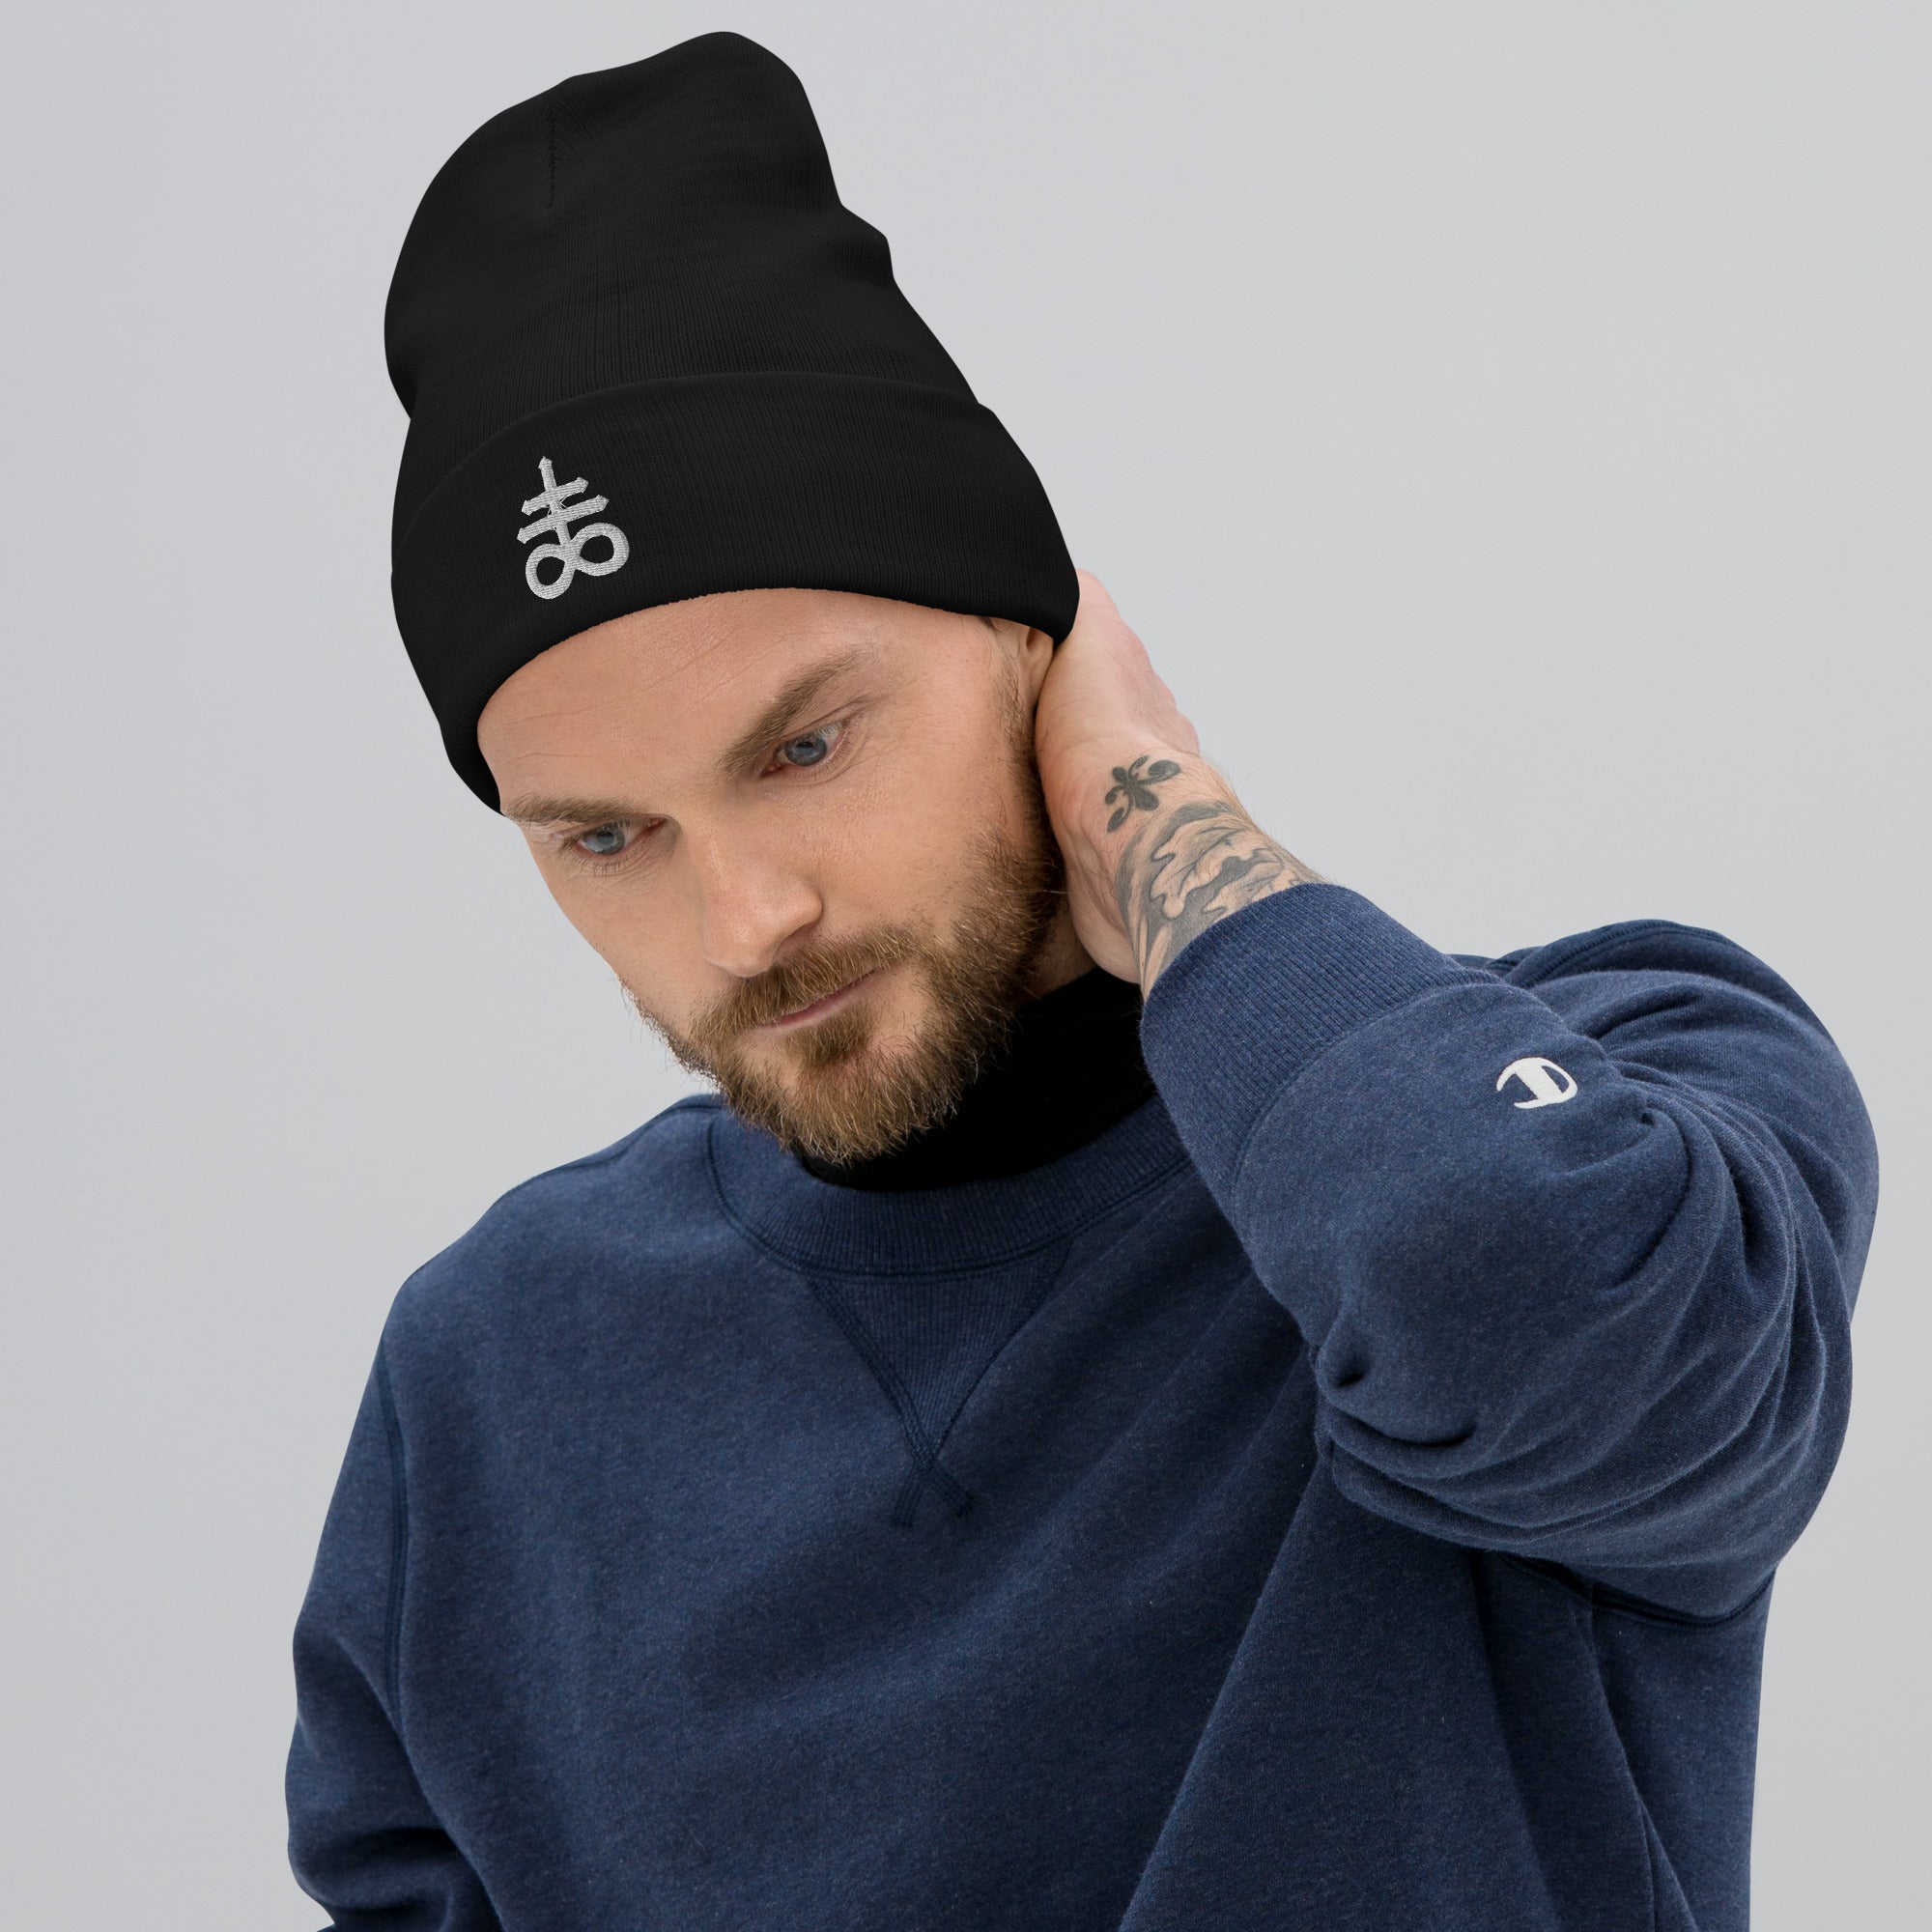 The Leviathan Cross of Satan Occult Symbol Embroidered Cuff Beanie Black Sulfur - Edge of Life Designs